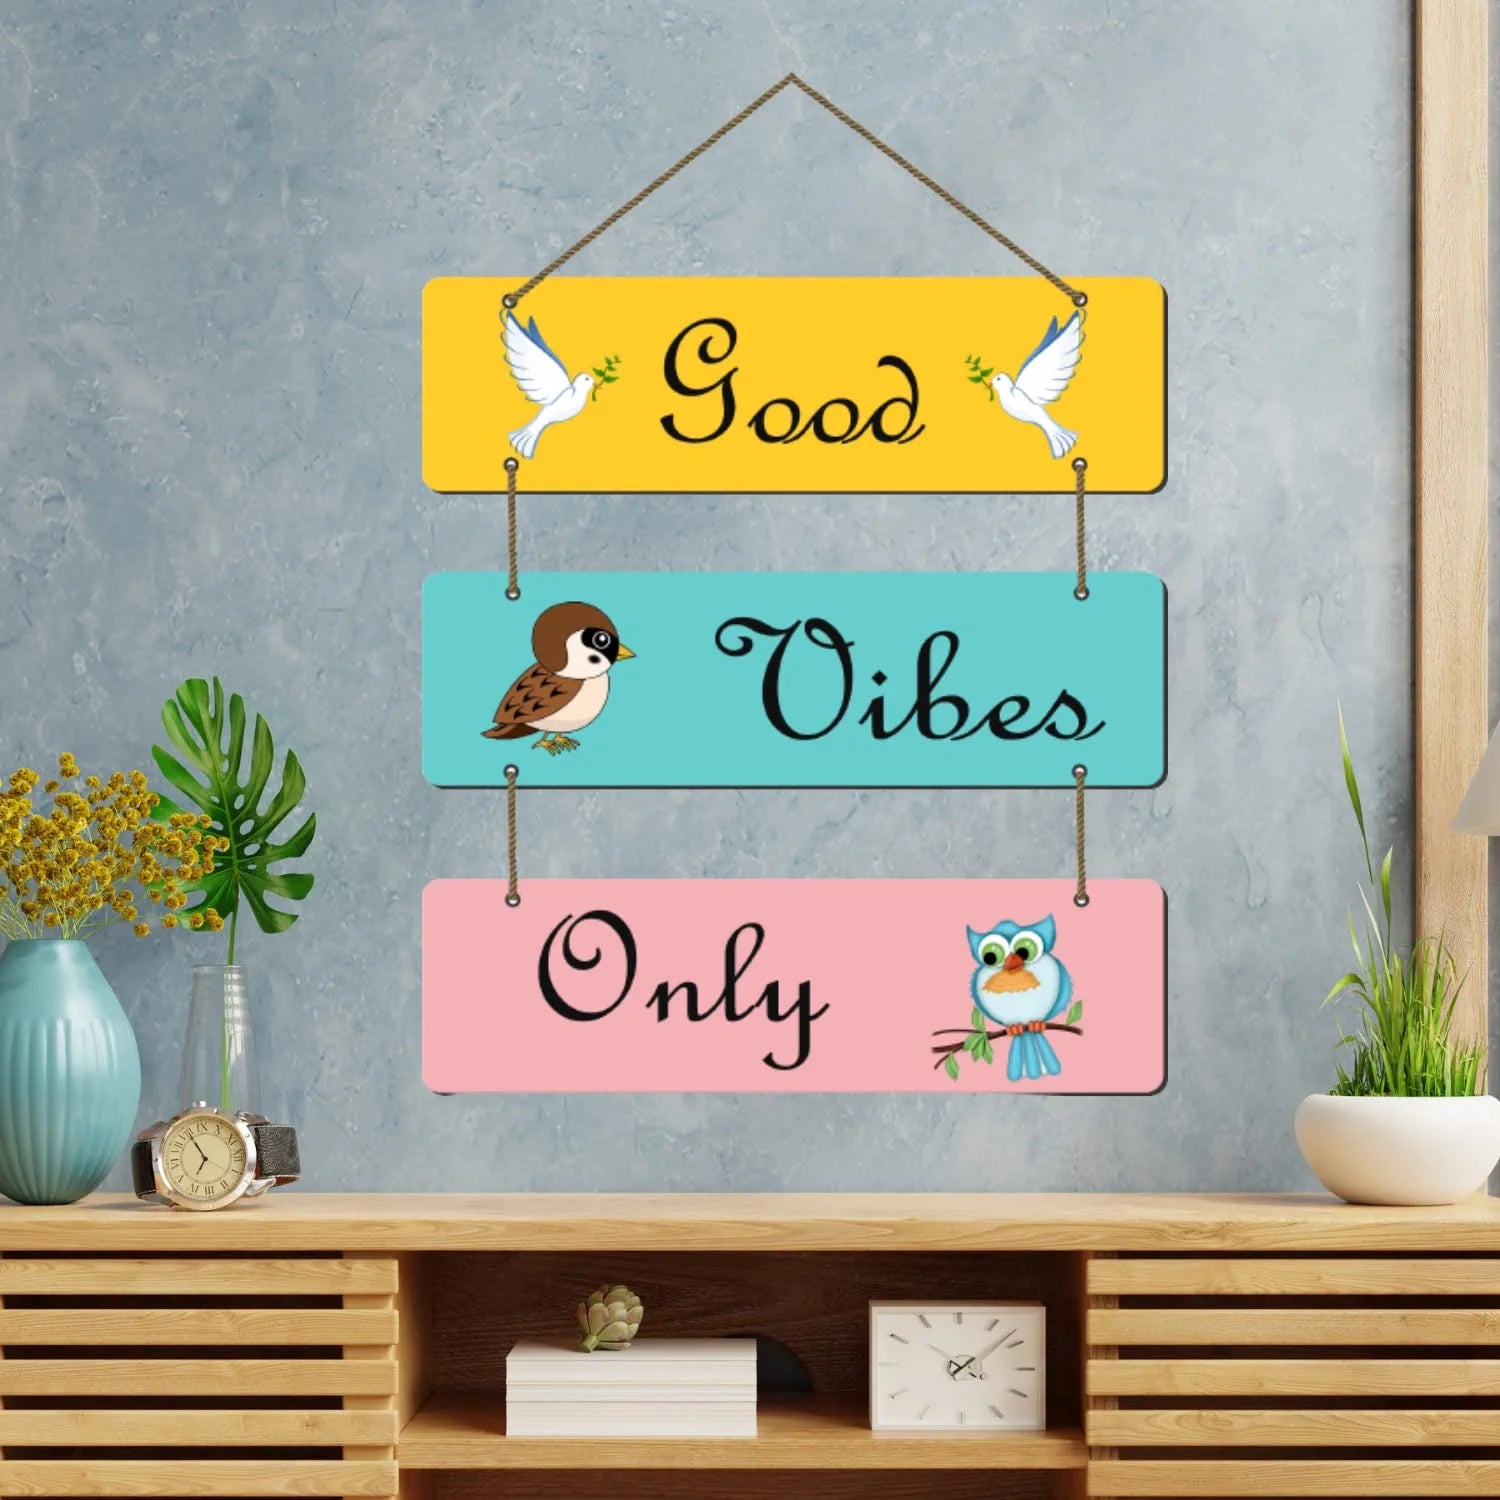 Webelkart®️ Decorative Welcome To Our Home Wall Hanging Wooden ...